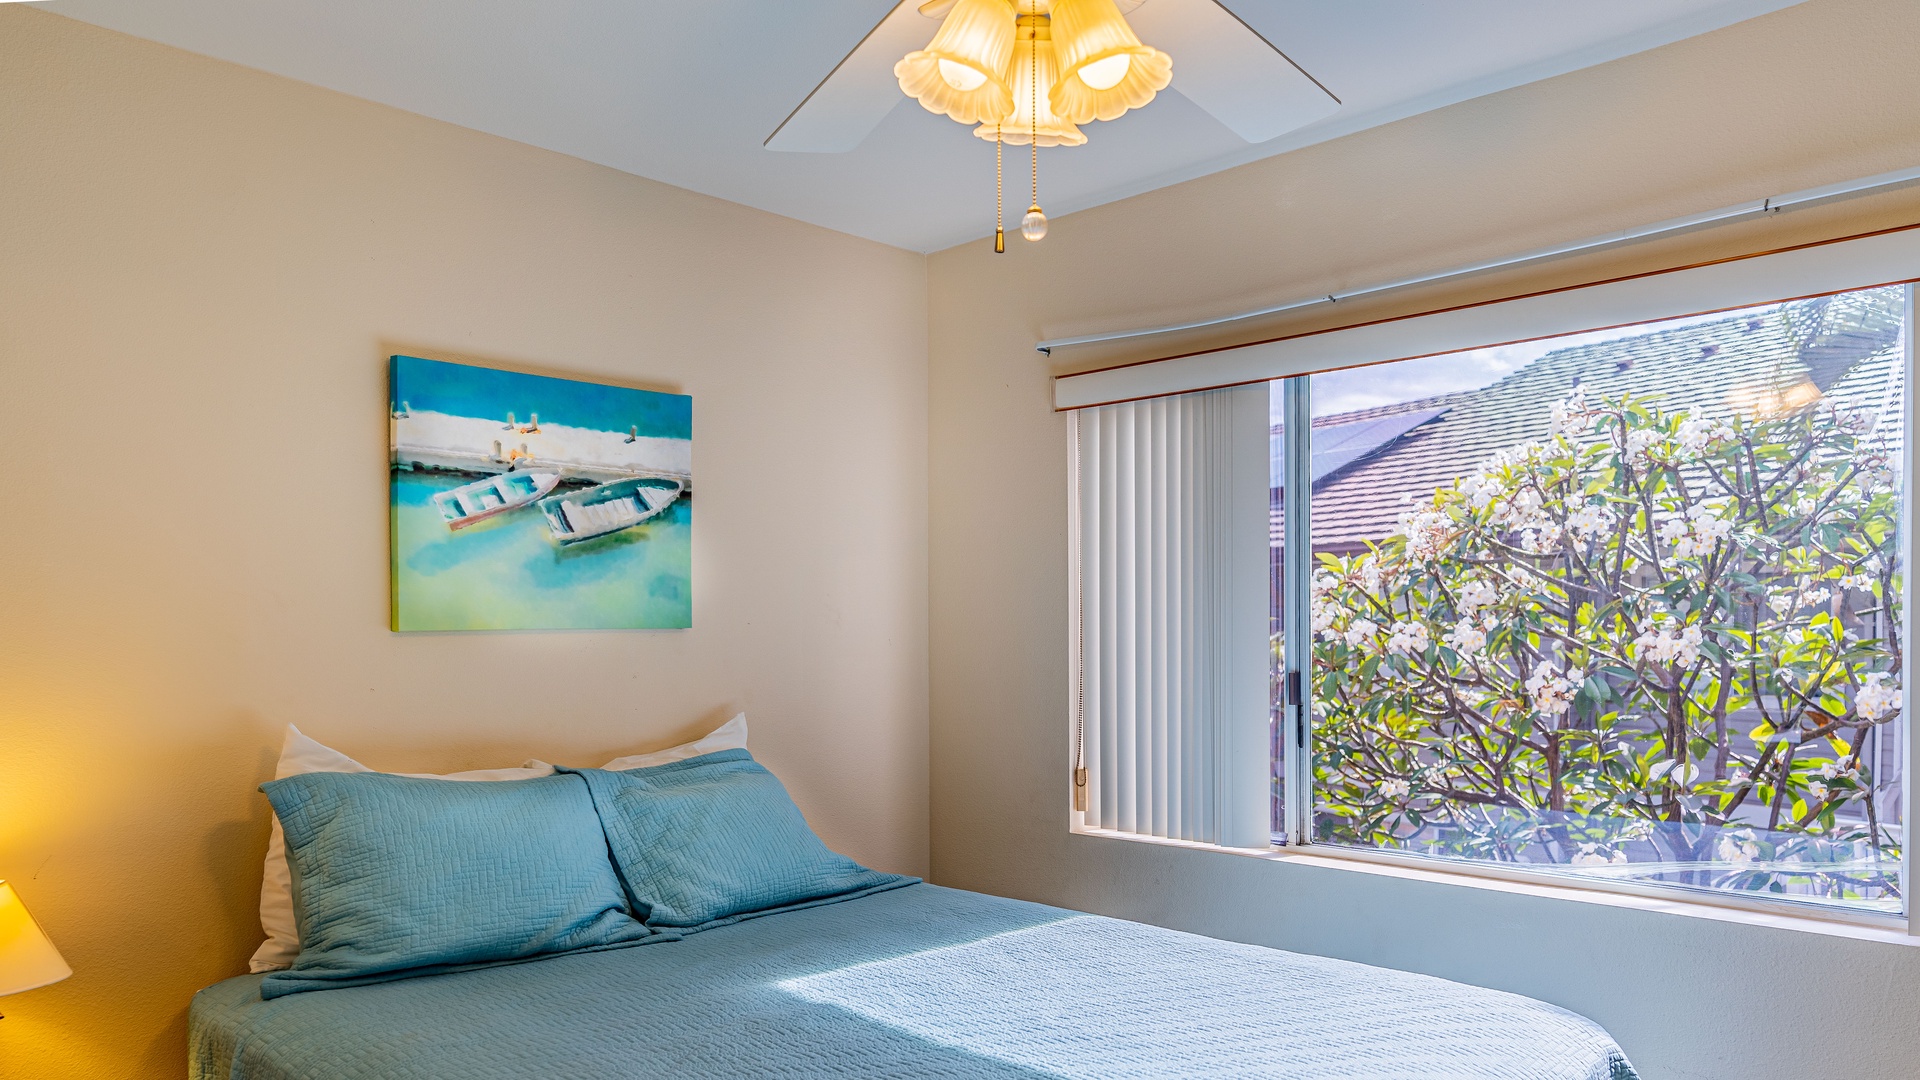 Kapolei Vacation Rentals, Fairways at Ko Olina 33F - The second guest bedroom features a television and comfortable bedding.